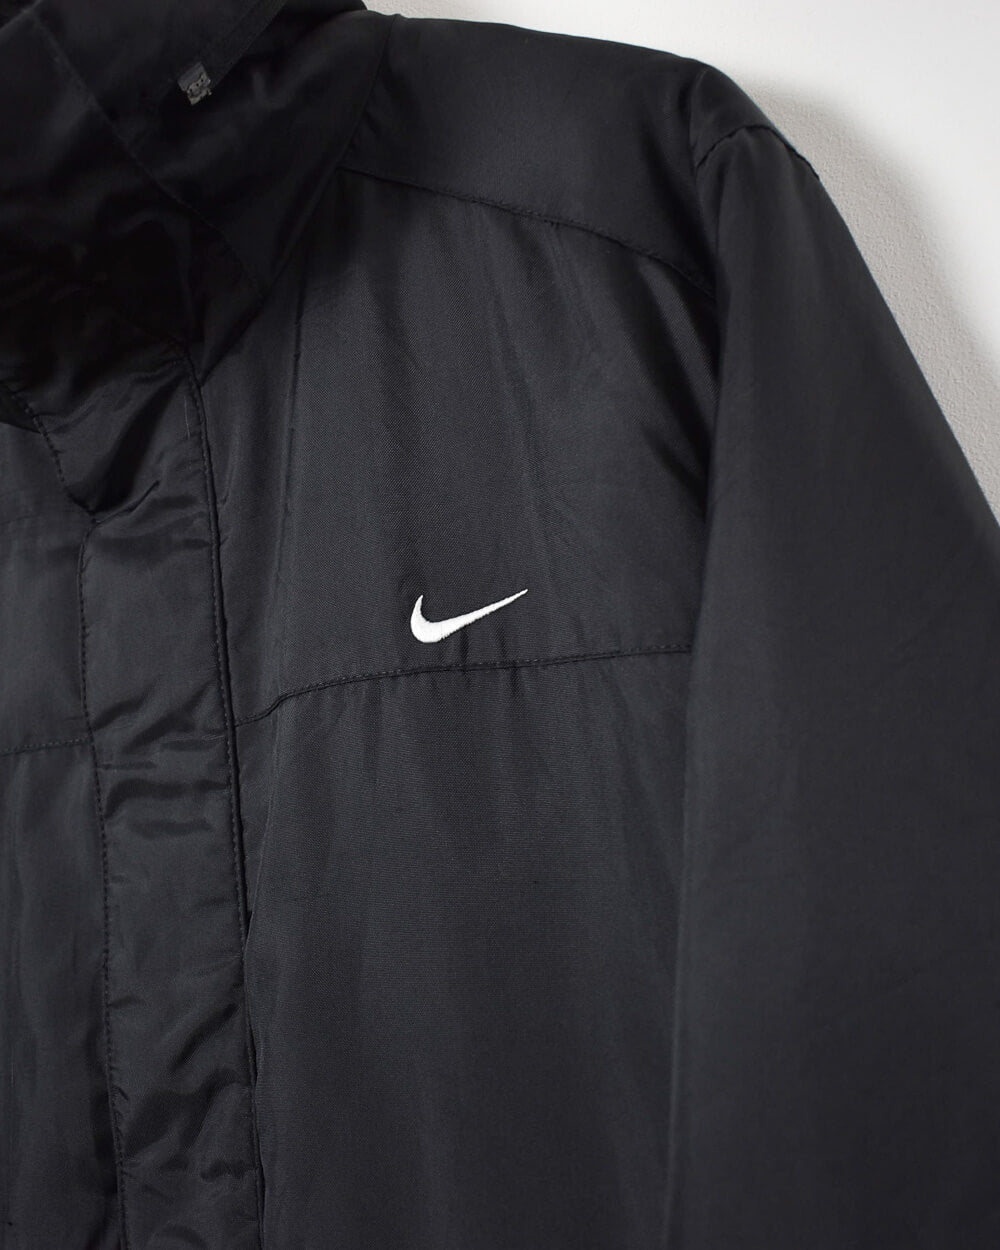 Nike The Athletic Dept. Winter Coat - Large - Domno Vintage 90s, 80s, 00s Retro and Vintage Clothing 